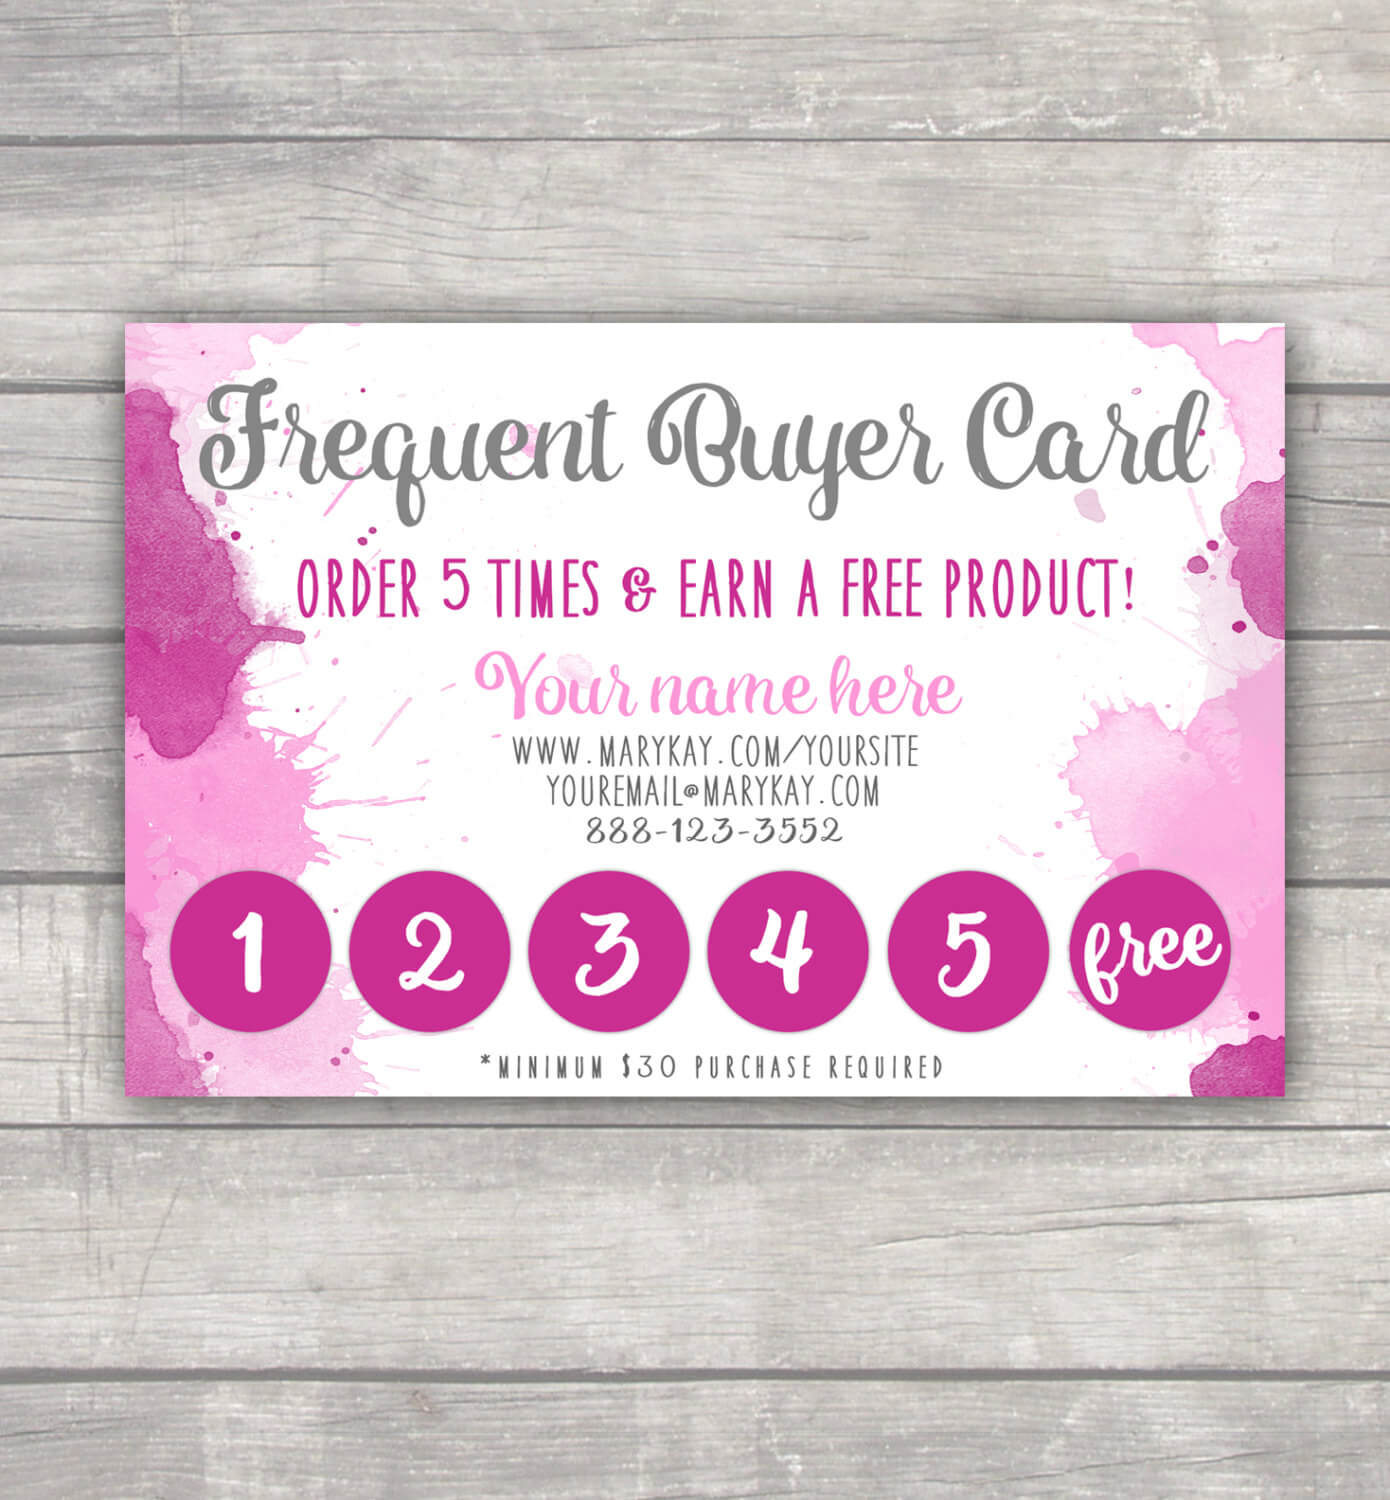 Frequent Buyer Card Template Free – Calep.midnightpig.co Inside Mary Kay Business Cards Templates Free